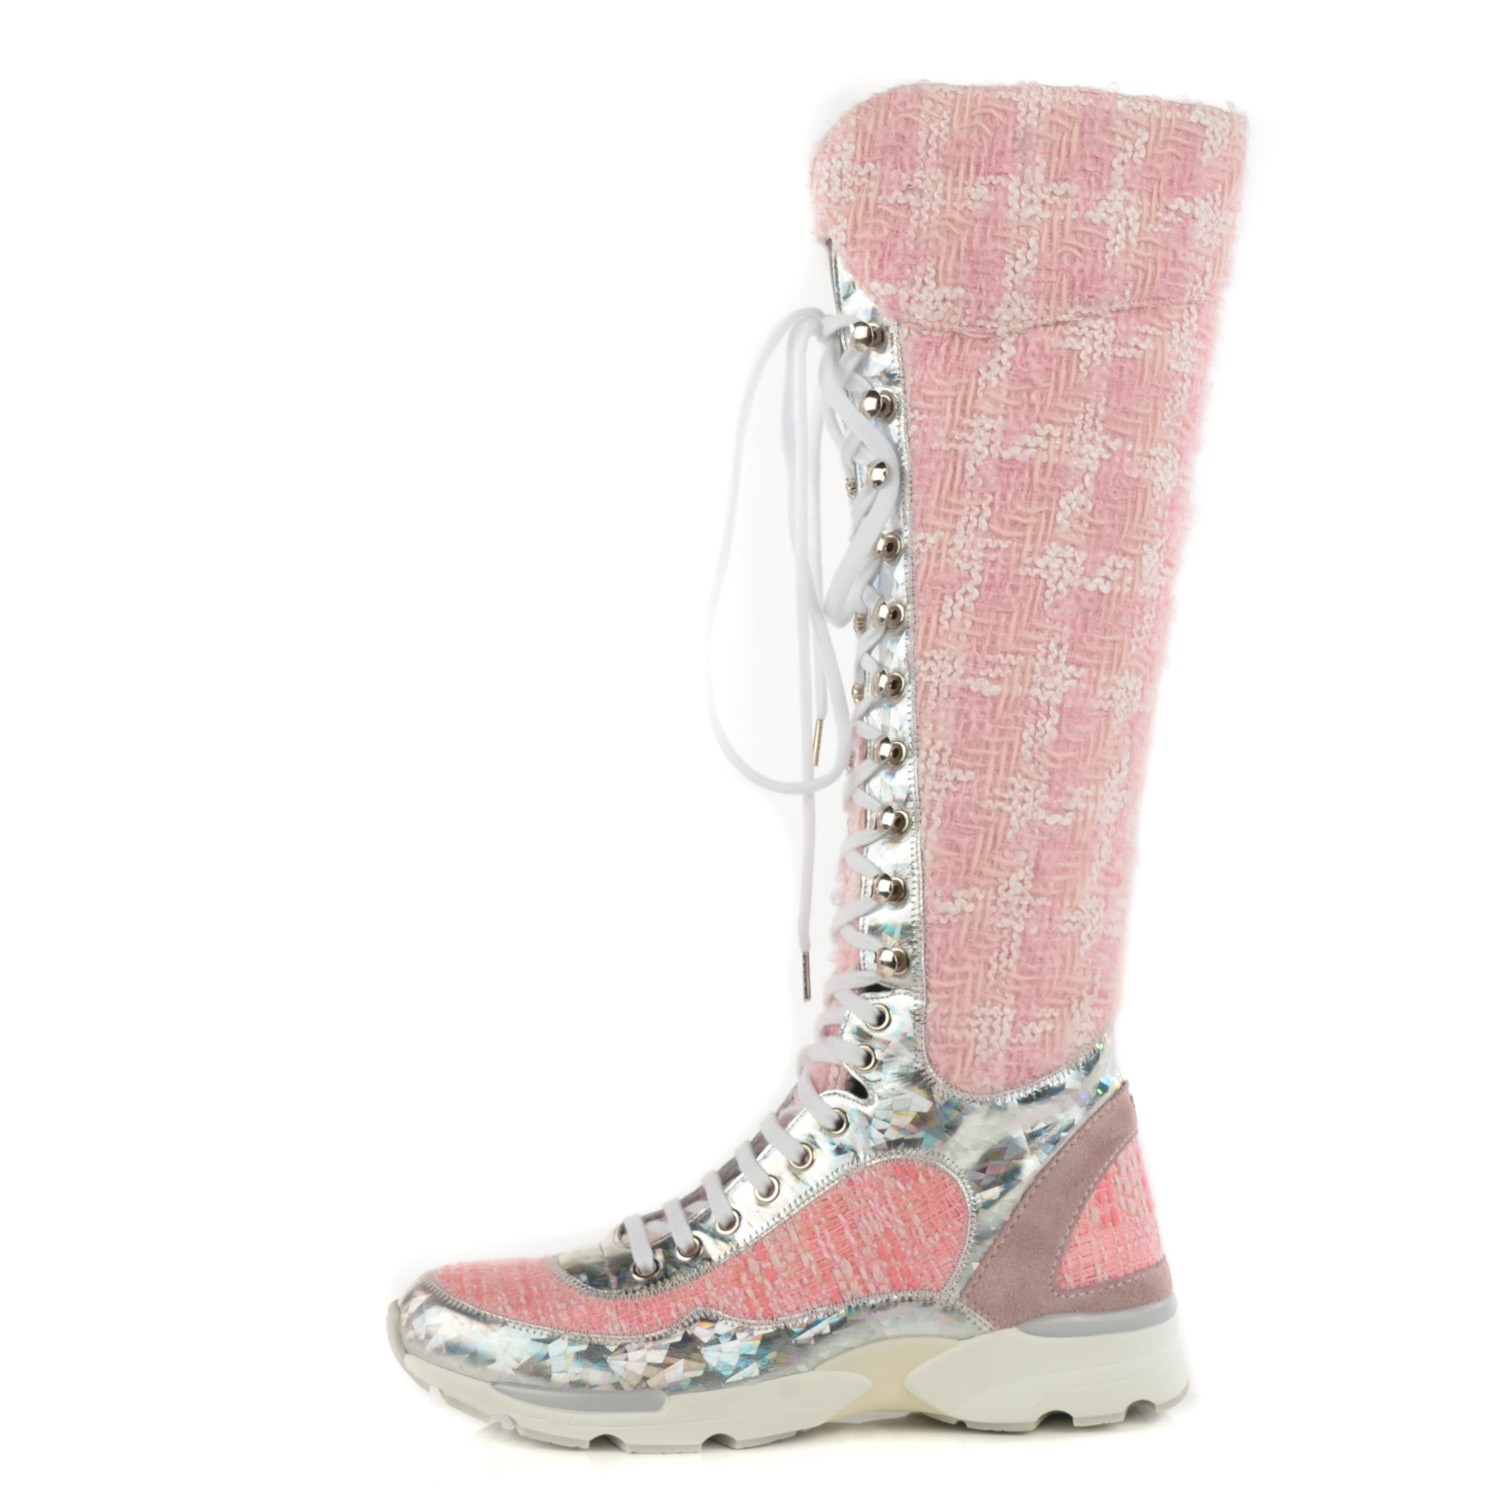 pink sneaker boots